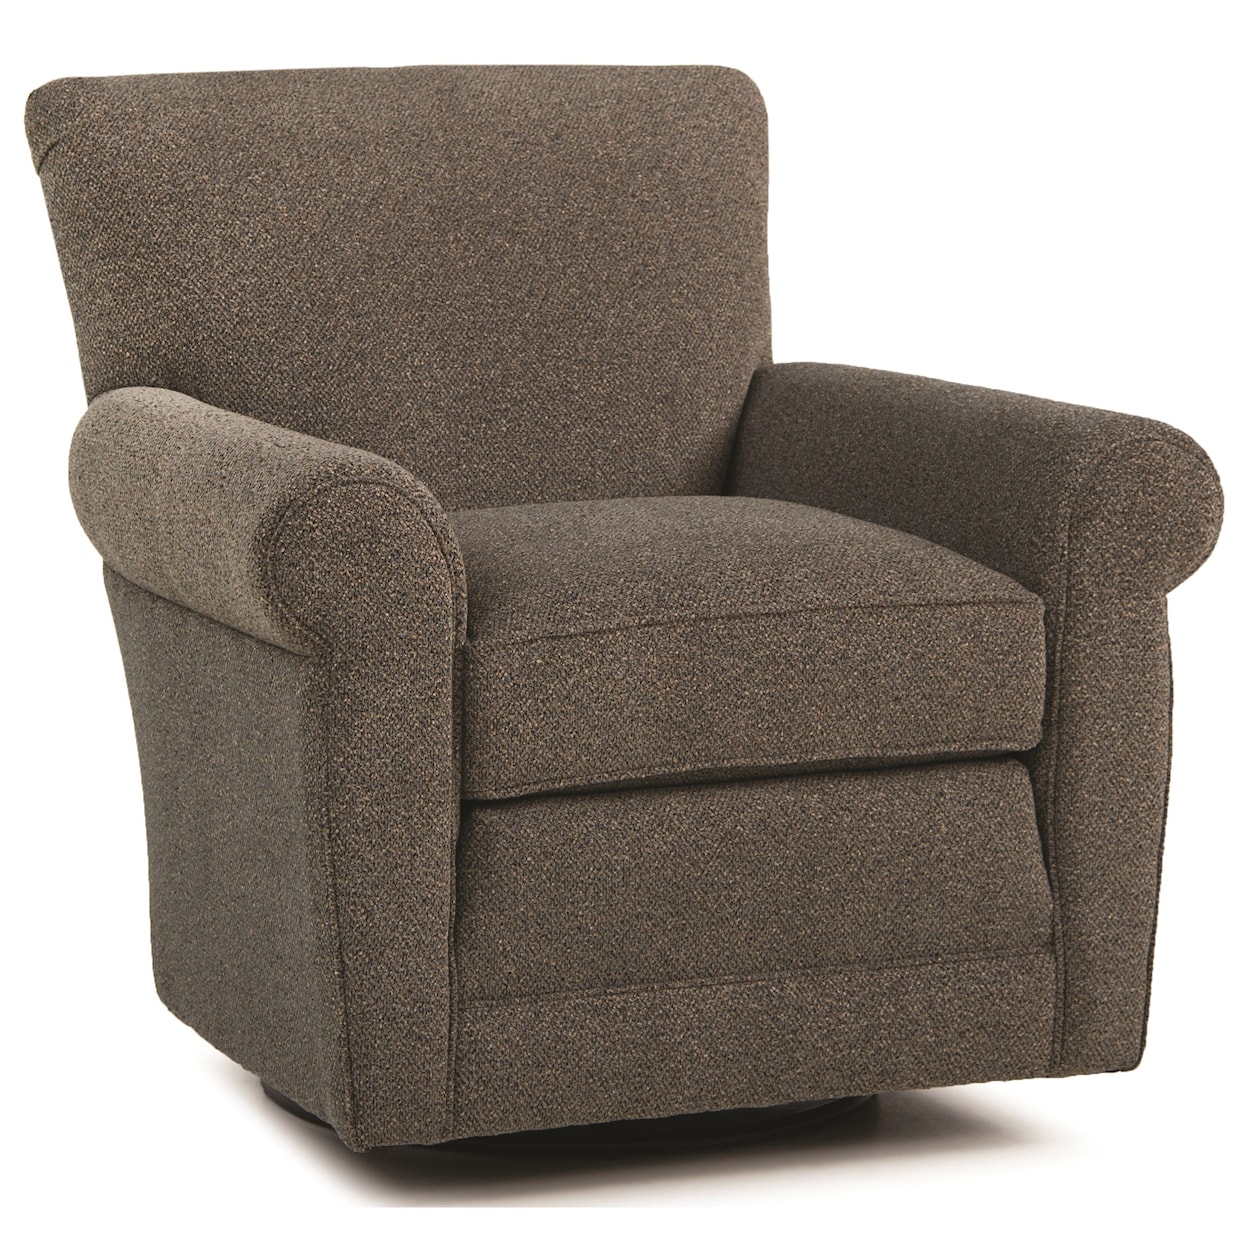 Smith Brothers 514 Swivel Chair